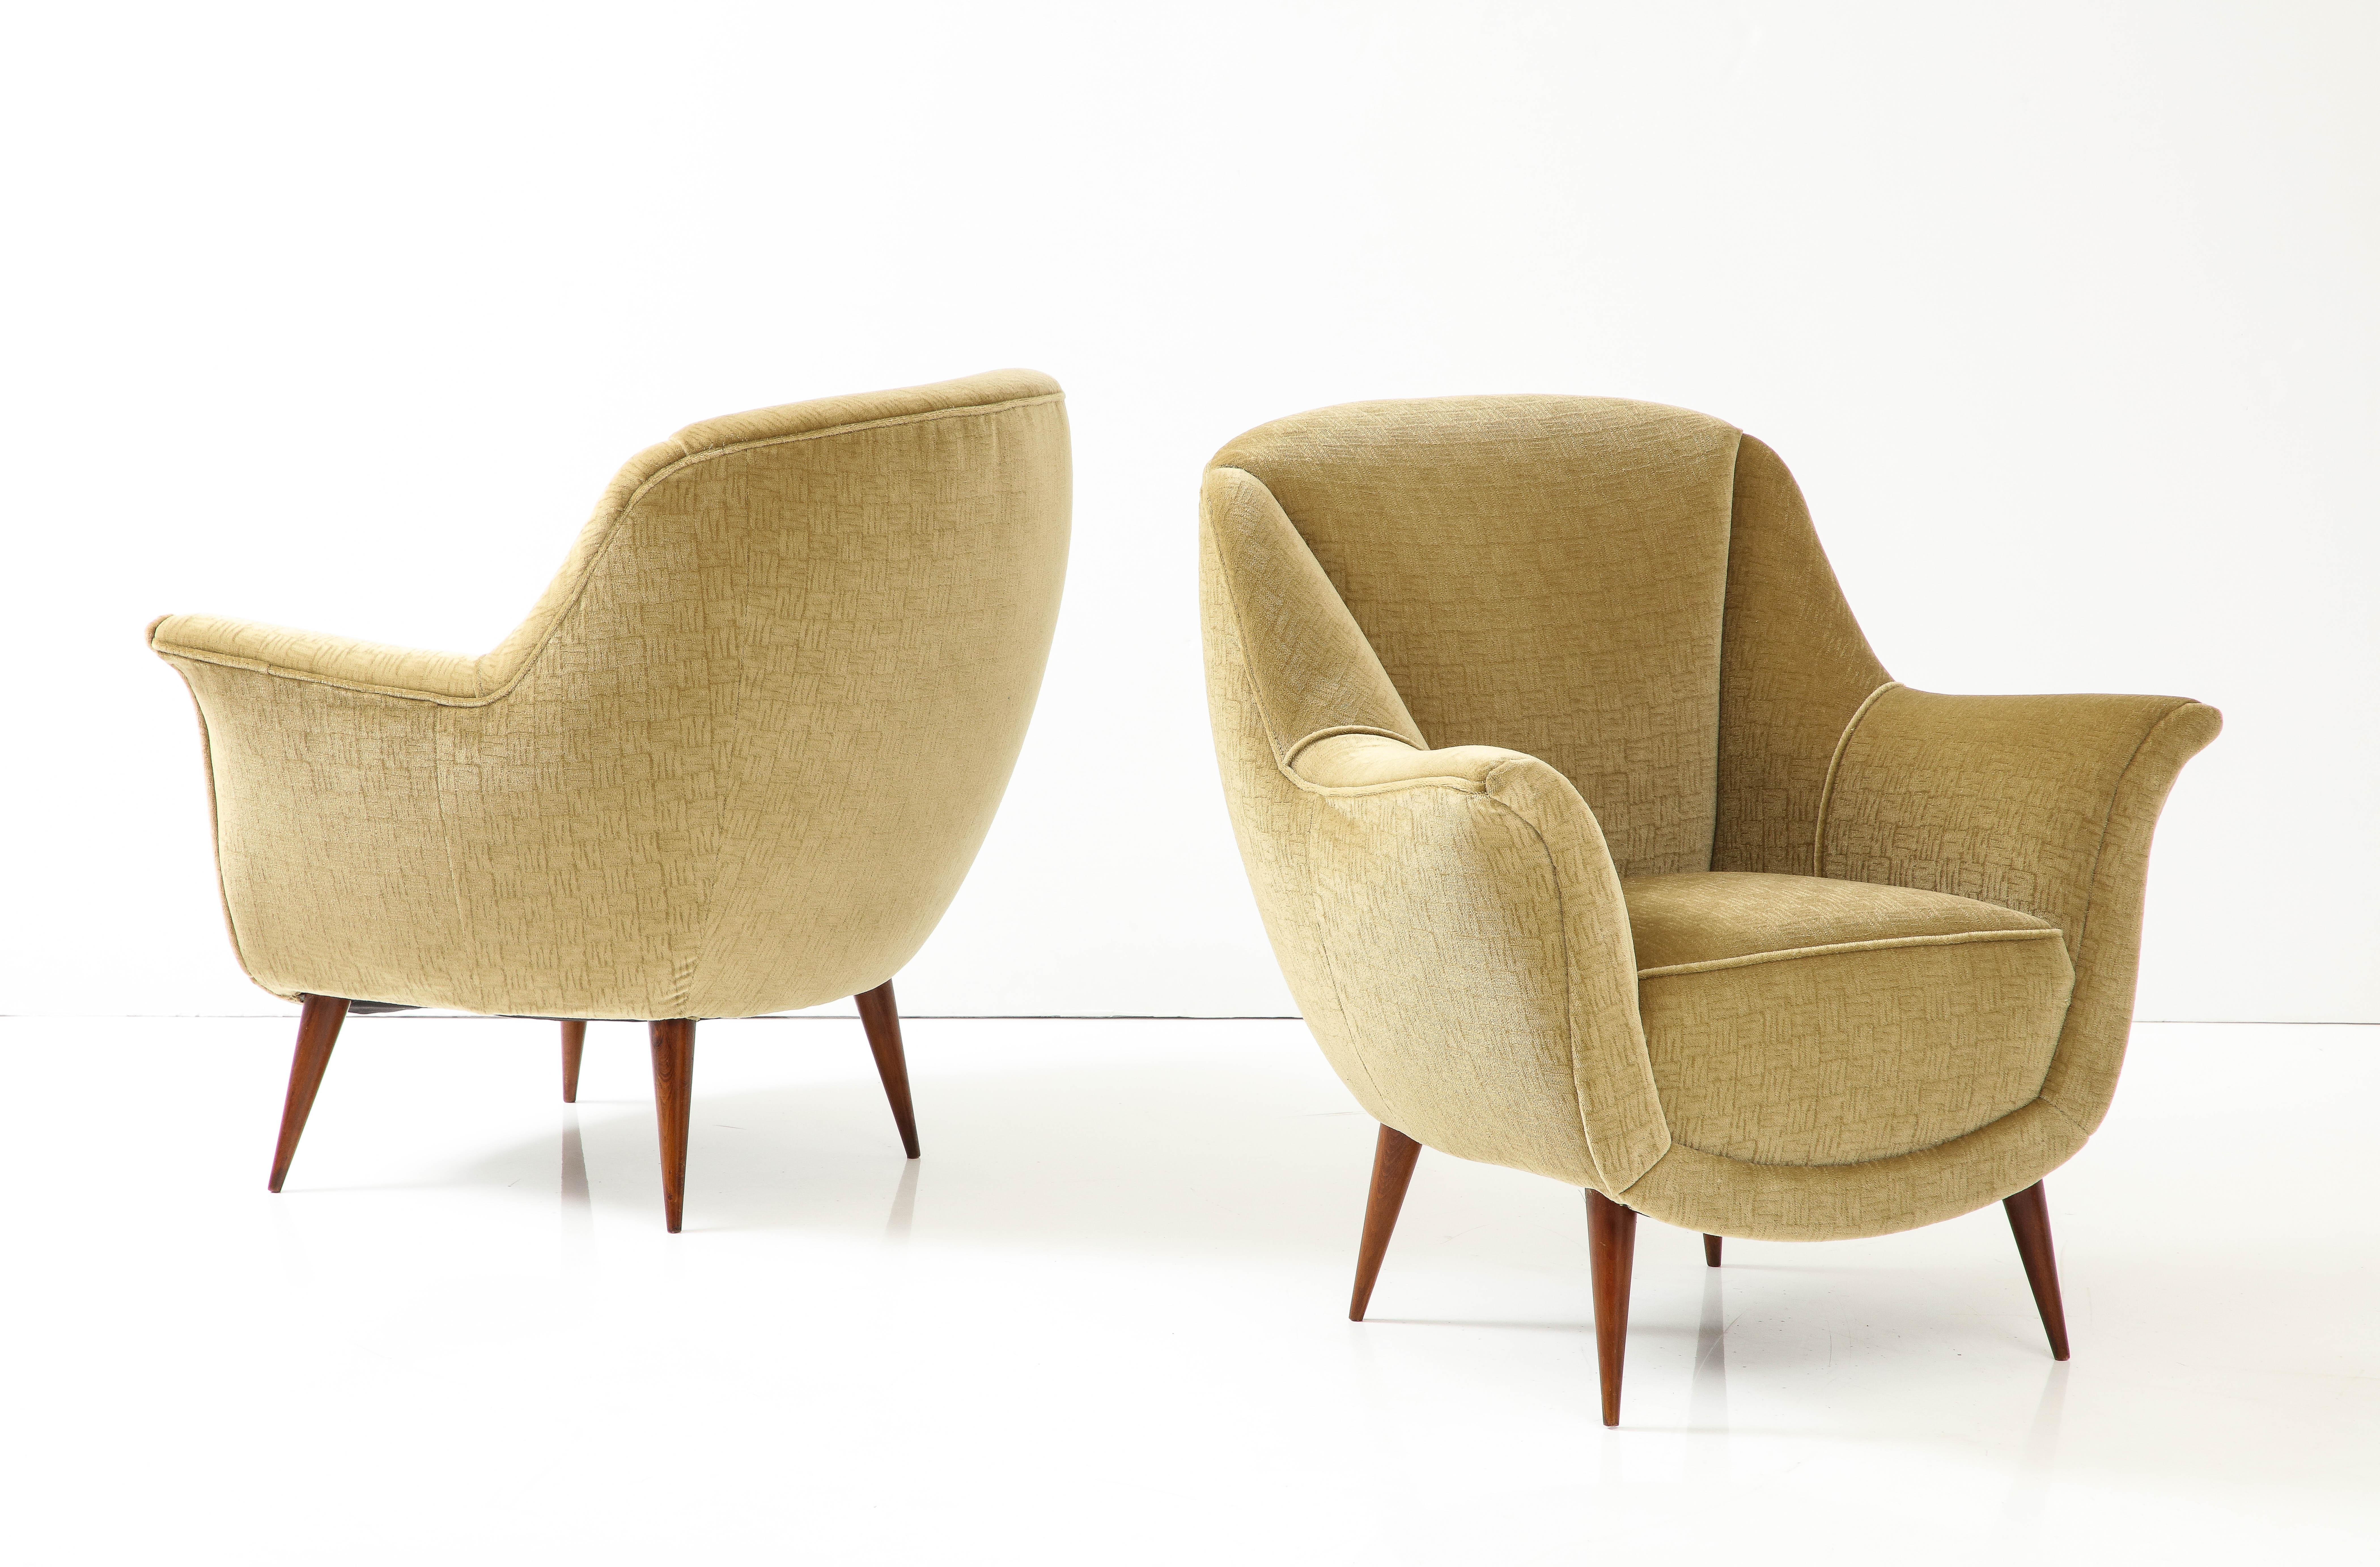 Mid-Century Modern 1950's Modernist Gio Ponti Style Italian Lounge Chairs In Mohair Upholstery For Sale